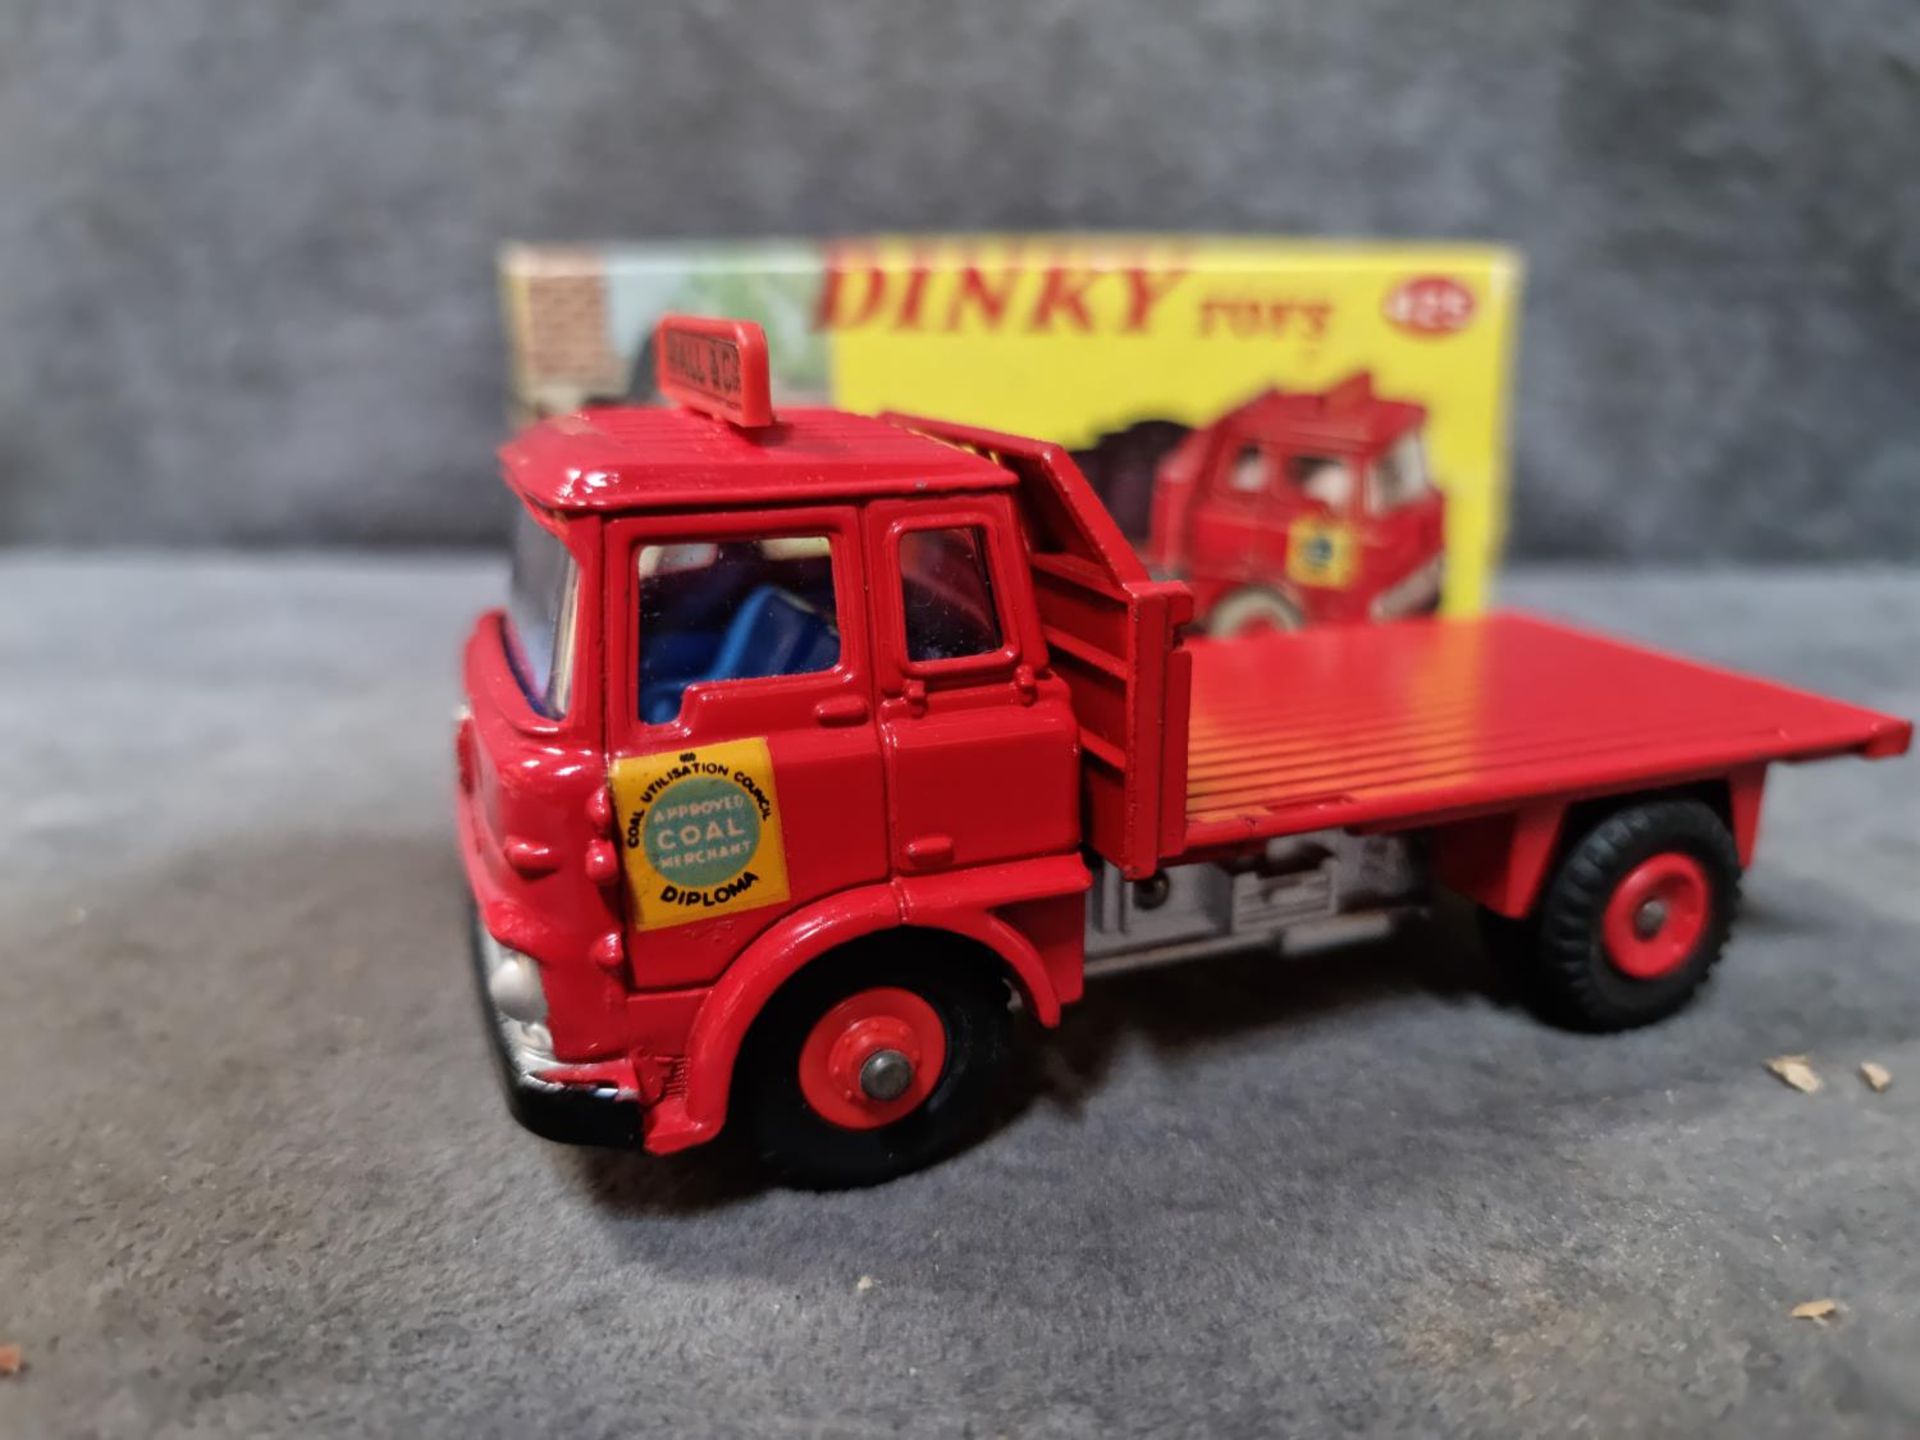 Dinky #425 Bedford TK Coal Wagon Red - Plastic Wheels. Comes With 6 Sacks Of Coal And Scales Mint